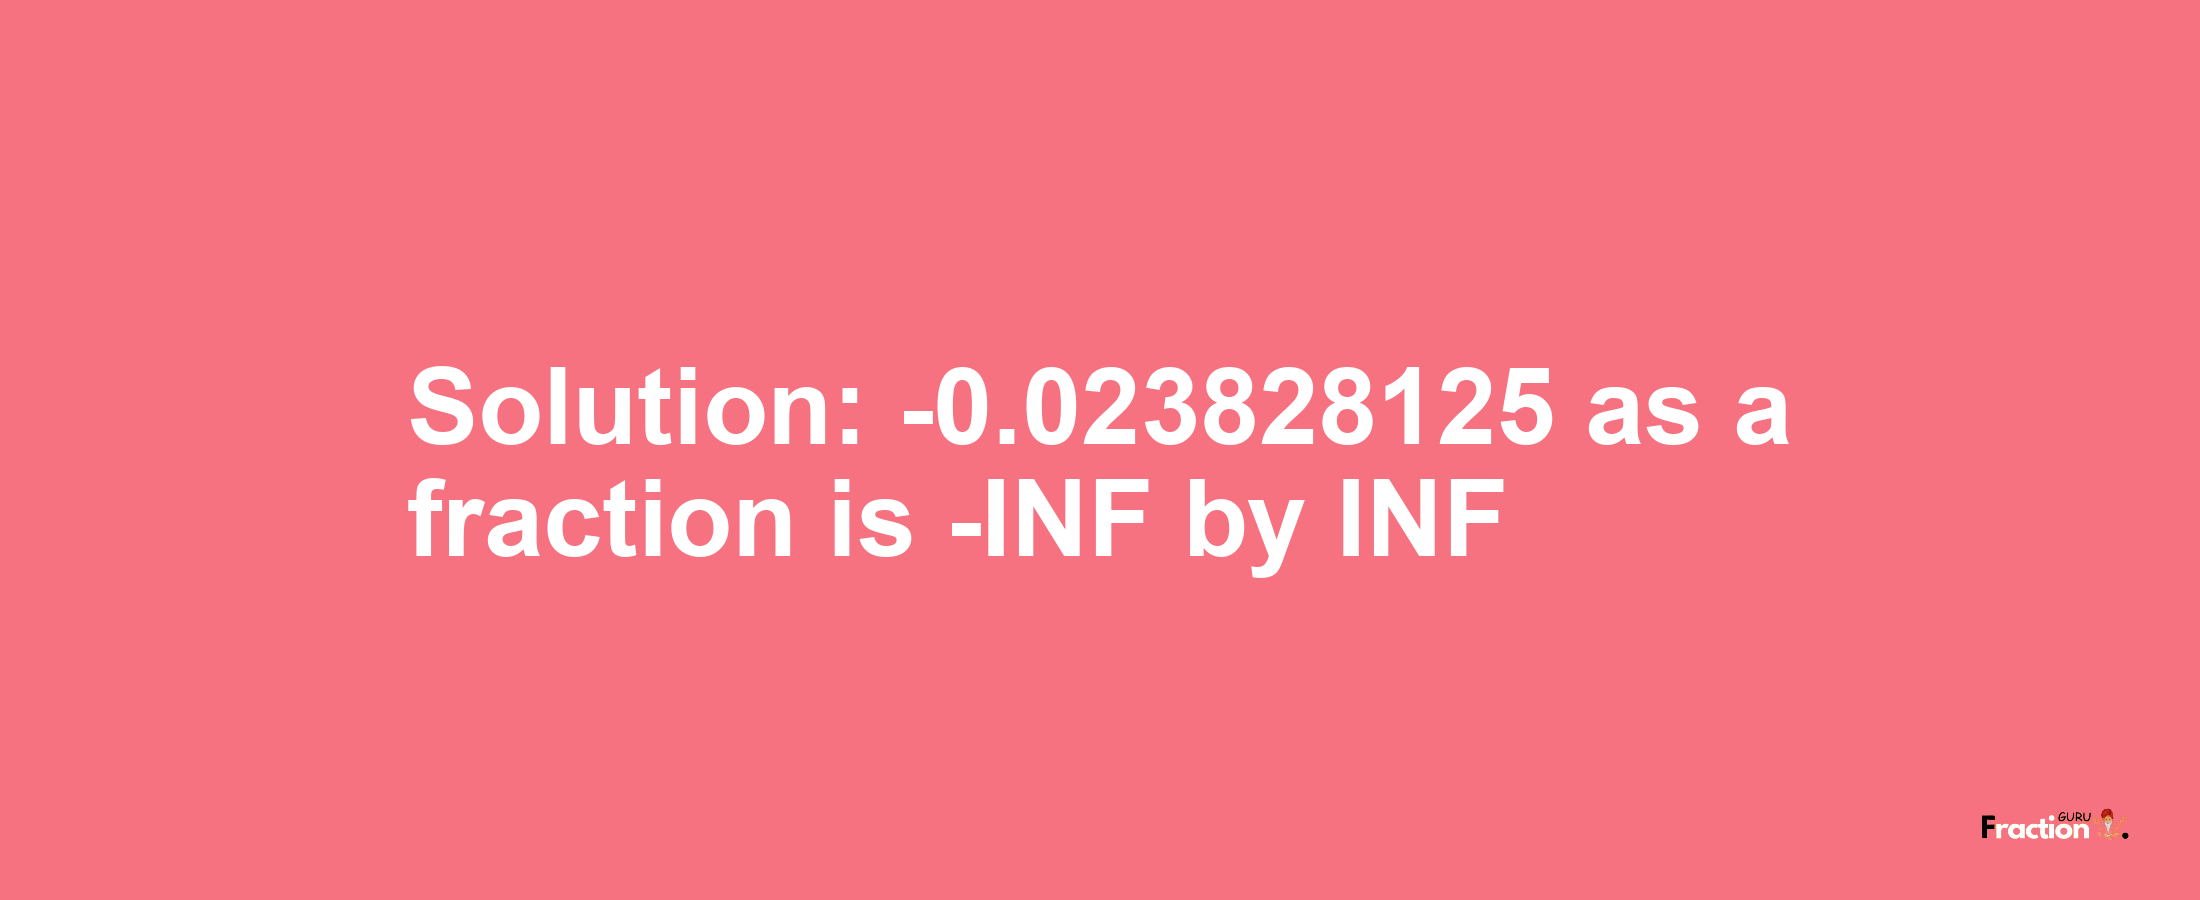 Solution:-0.023828125 as a fraction is -INF/INF